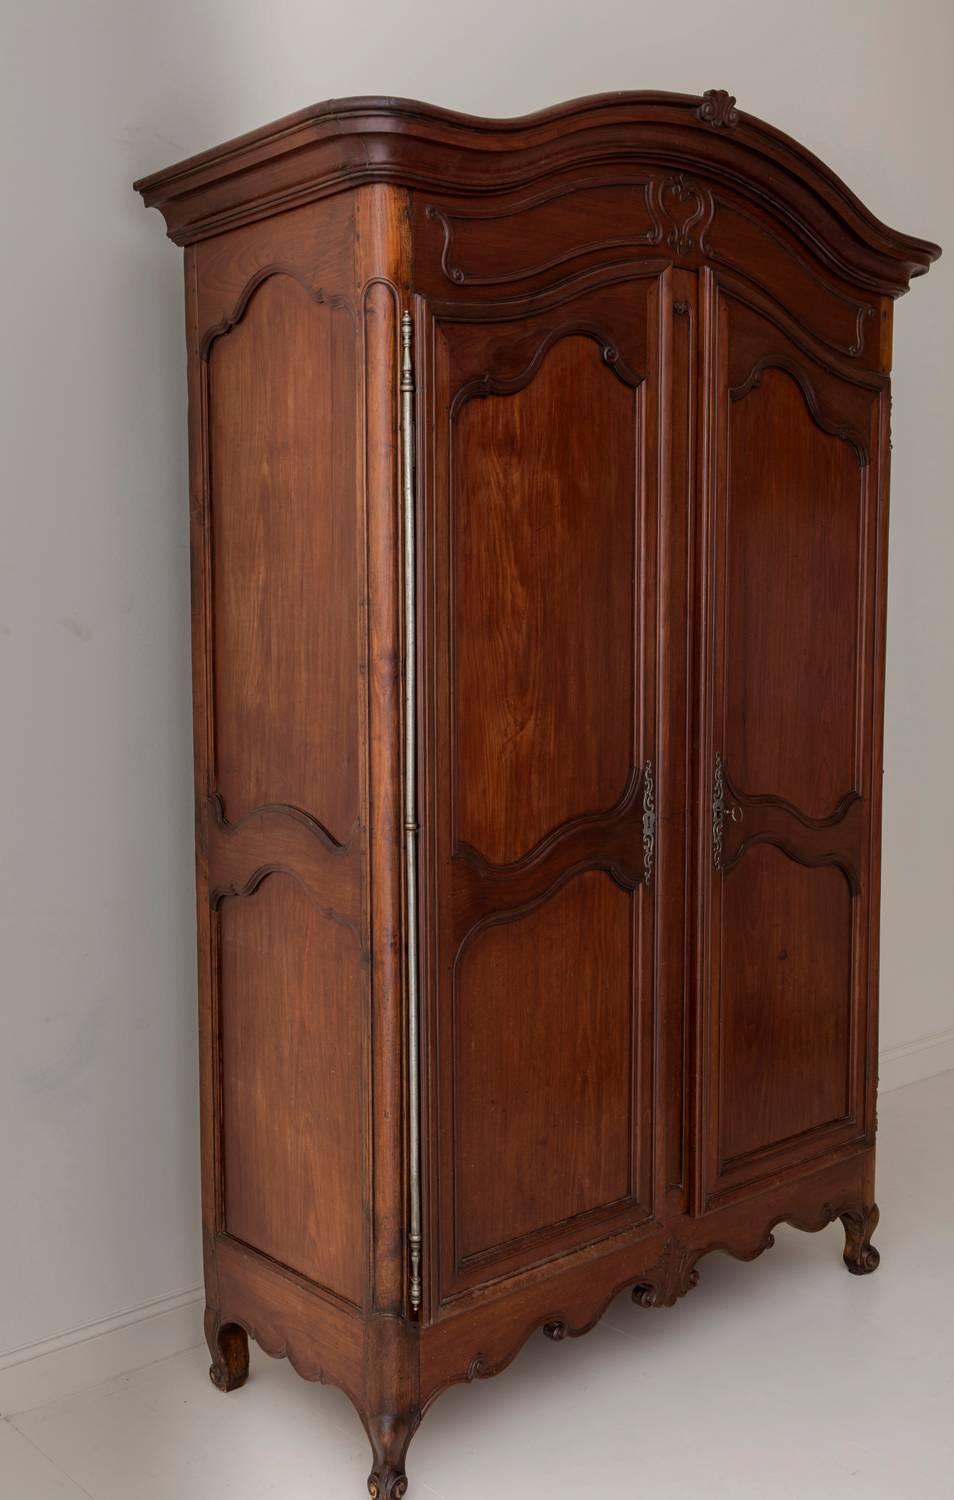 An exceptional early 19th century mahogany wood armoire from the Bordeaux region of France, circa 1810. Arched carved bonnet, two large carved doors, and shaped apron, raised upon cabriole legs. There are three shelves within, the top two are